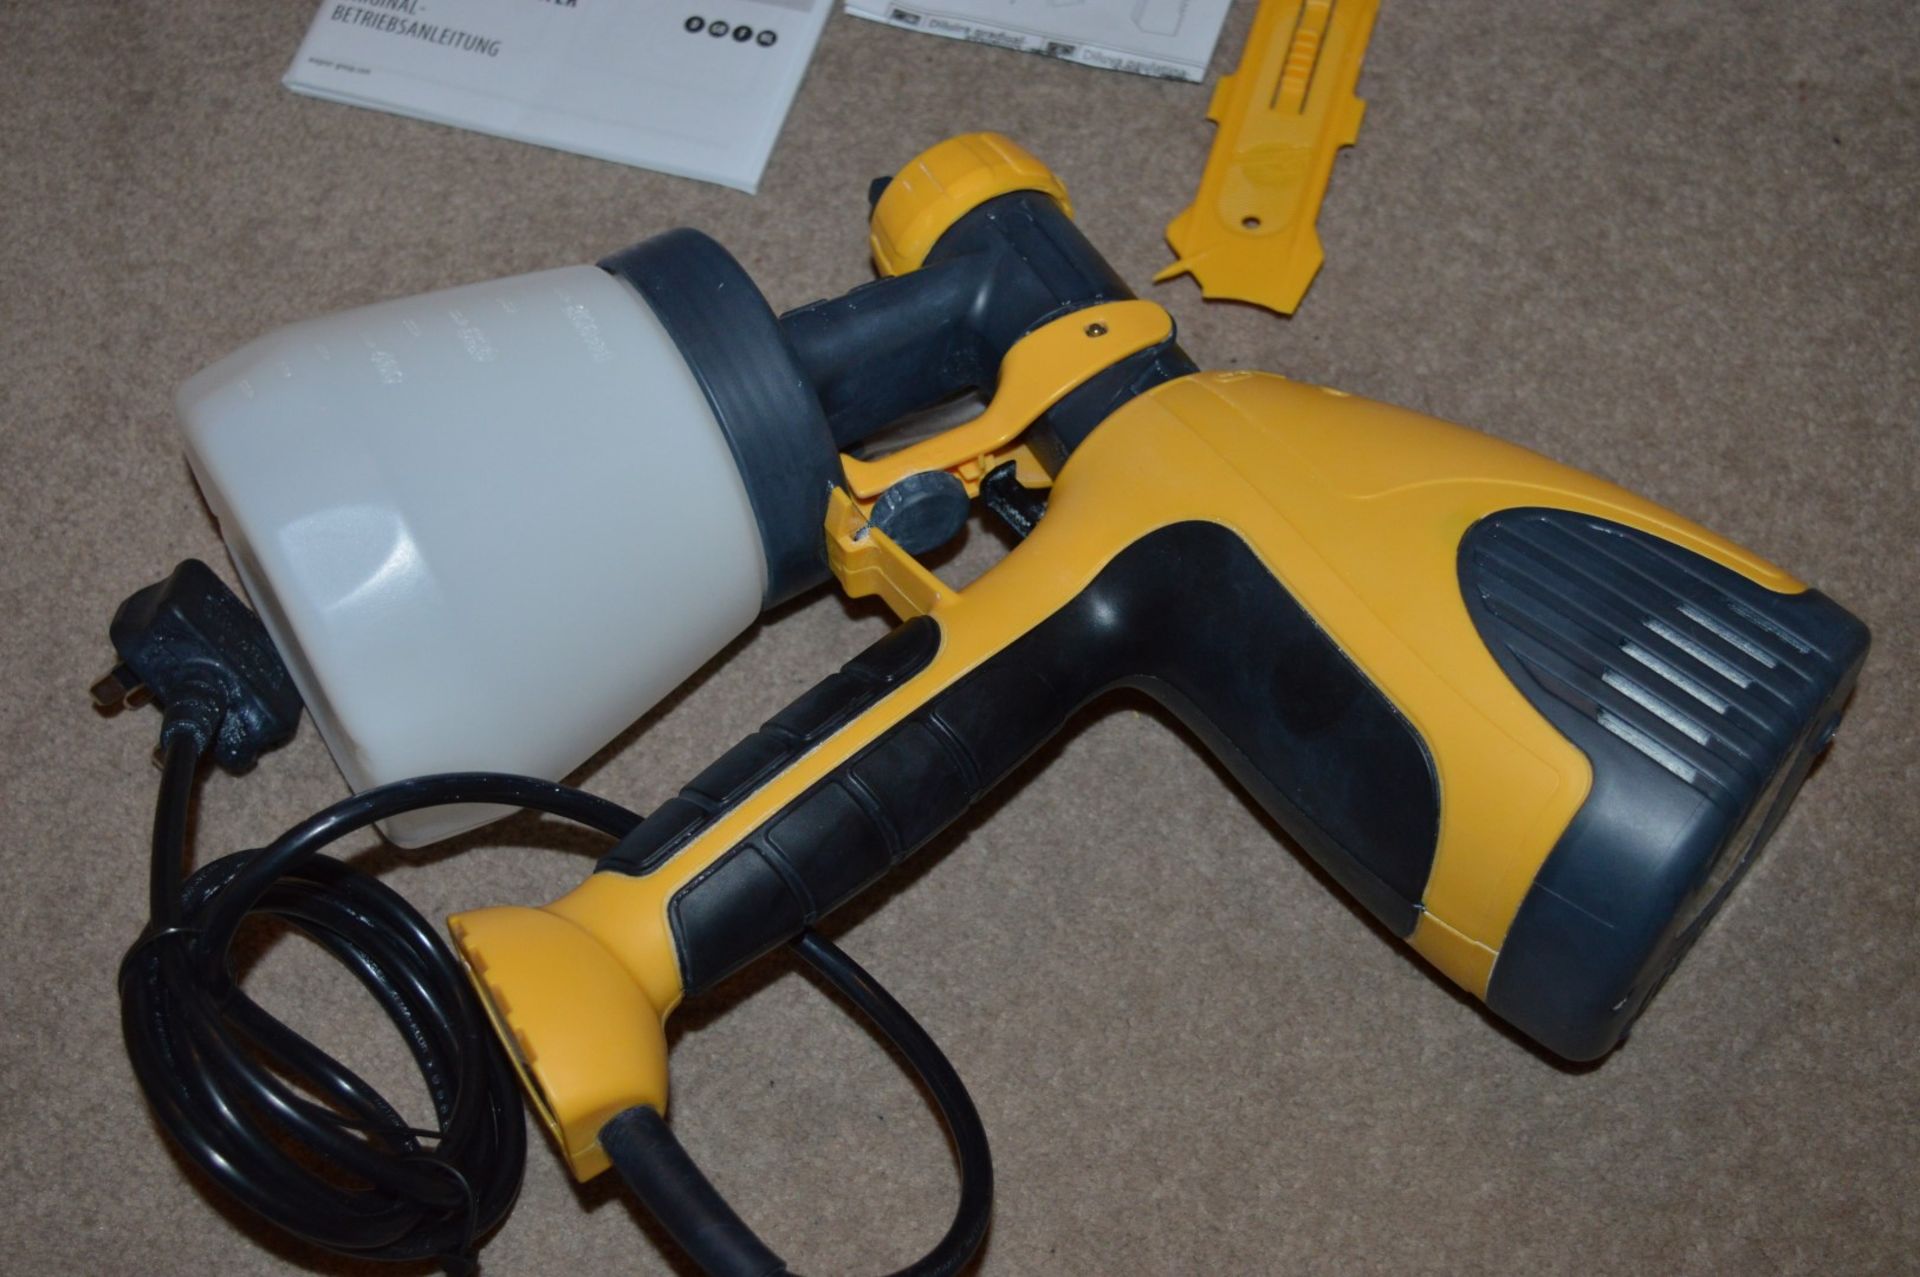 1 x Wagner W100 Wood & Metal Paint Sprayer - Good Working Order - CL010 - Ref J903 - Image 4 of 4